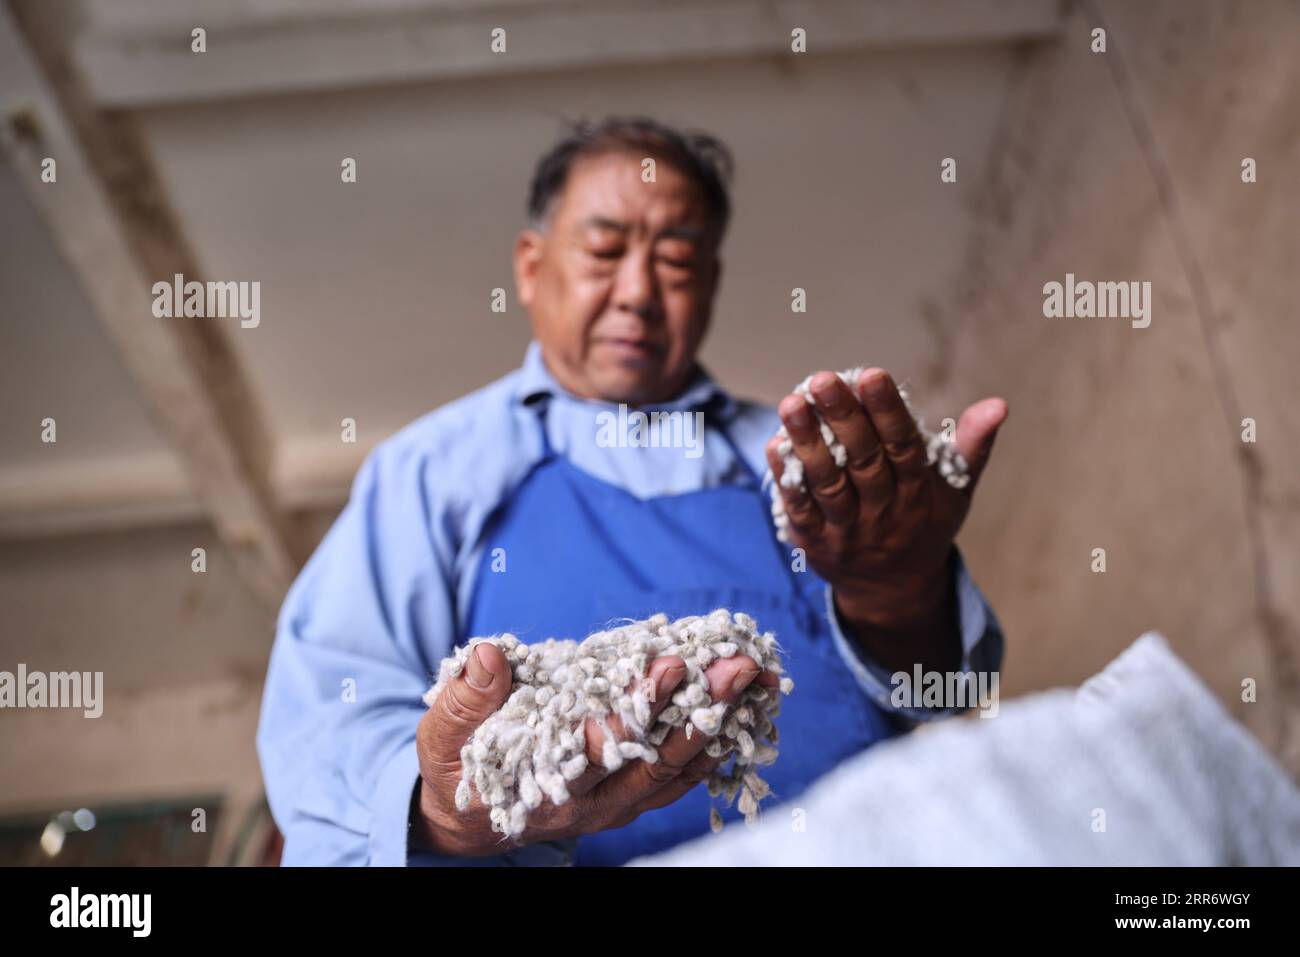 210302 -- SANYA, March 2, 2021 -- Zhao Guozhong checks cotton seeds in a warehouse at Nanfan breeding base in Sanya, south China s Hainan Province, Feb. 28, 2021. Zhao Guozhong, who has spent 43 Spring Festivals at Nanfan breeding base as an expert on cotton breeding, started every morning of his days in Sanya by dashing to the field to pollinate cotton plants and to observe their growth under the scorching sun. To speed up the cotton breeding process, Zhao travels back and forth between Hainan and Hebei Province in north China, where in October he harvests cotton specimen in Hebei and bring t Stock Photo